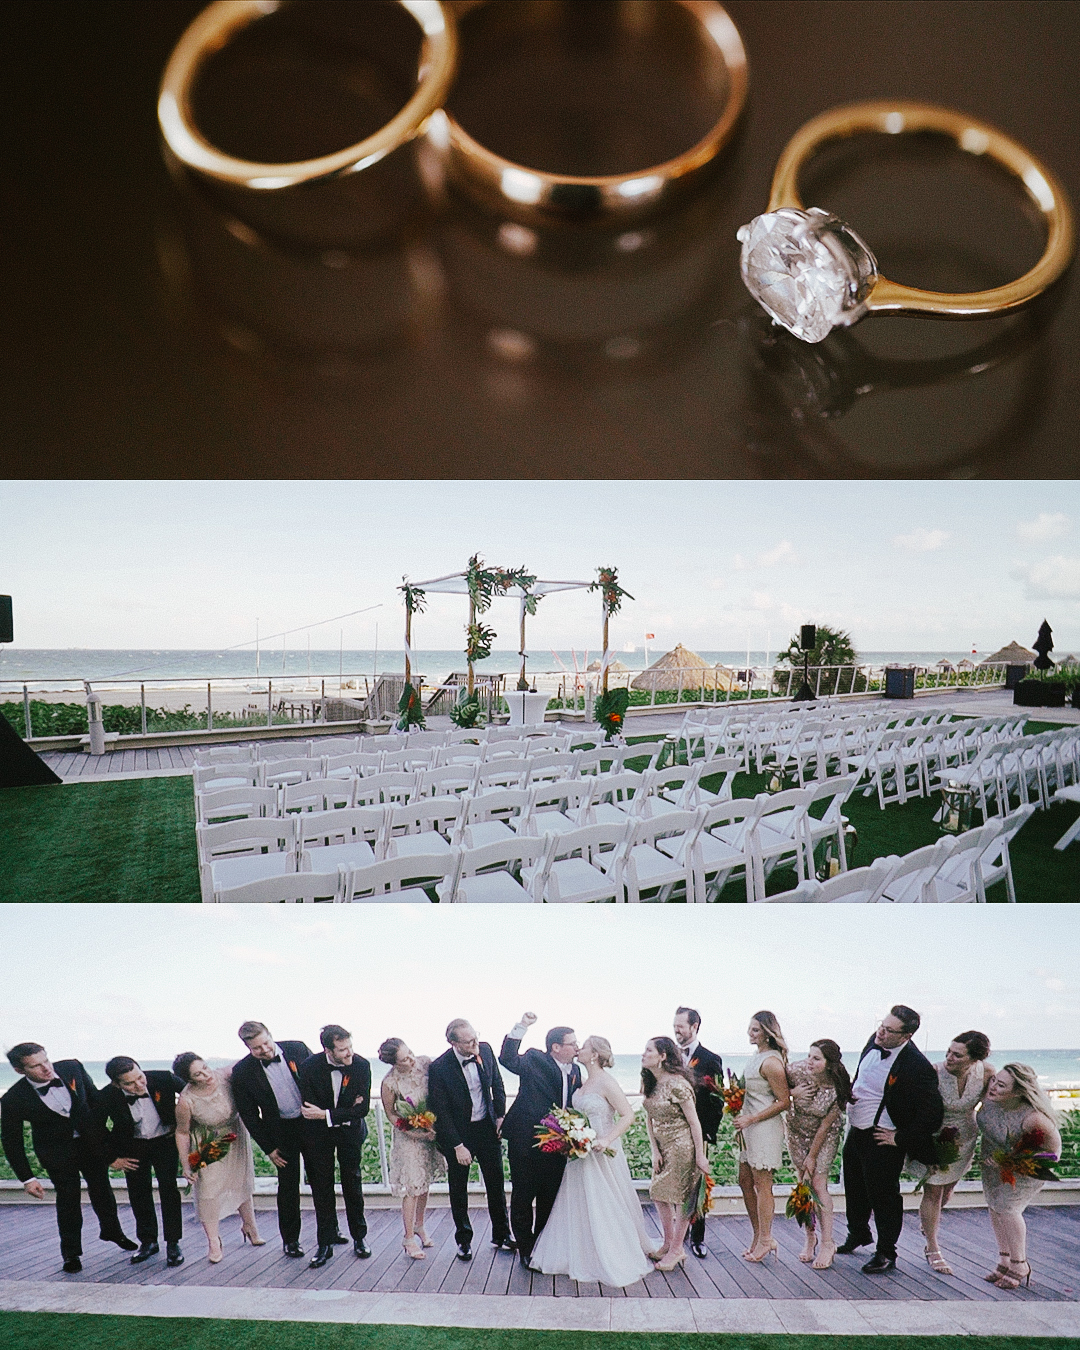 Mallory and Scott, wedding in Fort Lauderdale - image 3